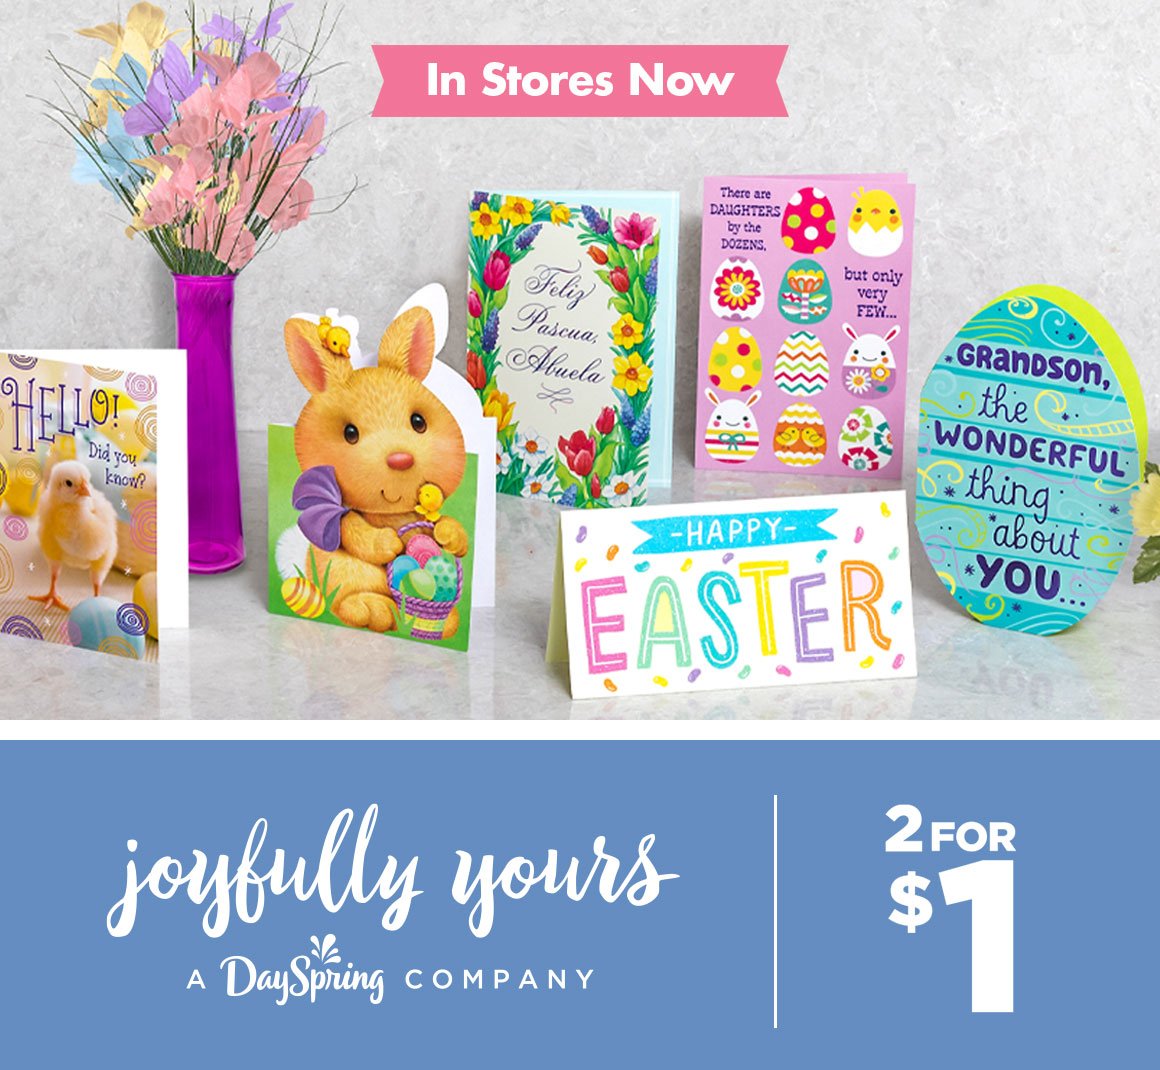 Dollar Tree 2 for 1 Easter Cards In Stores Now! Milled